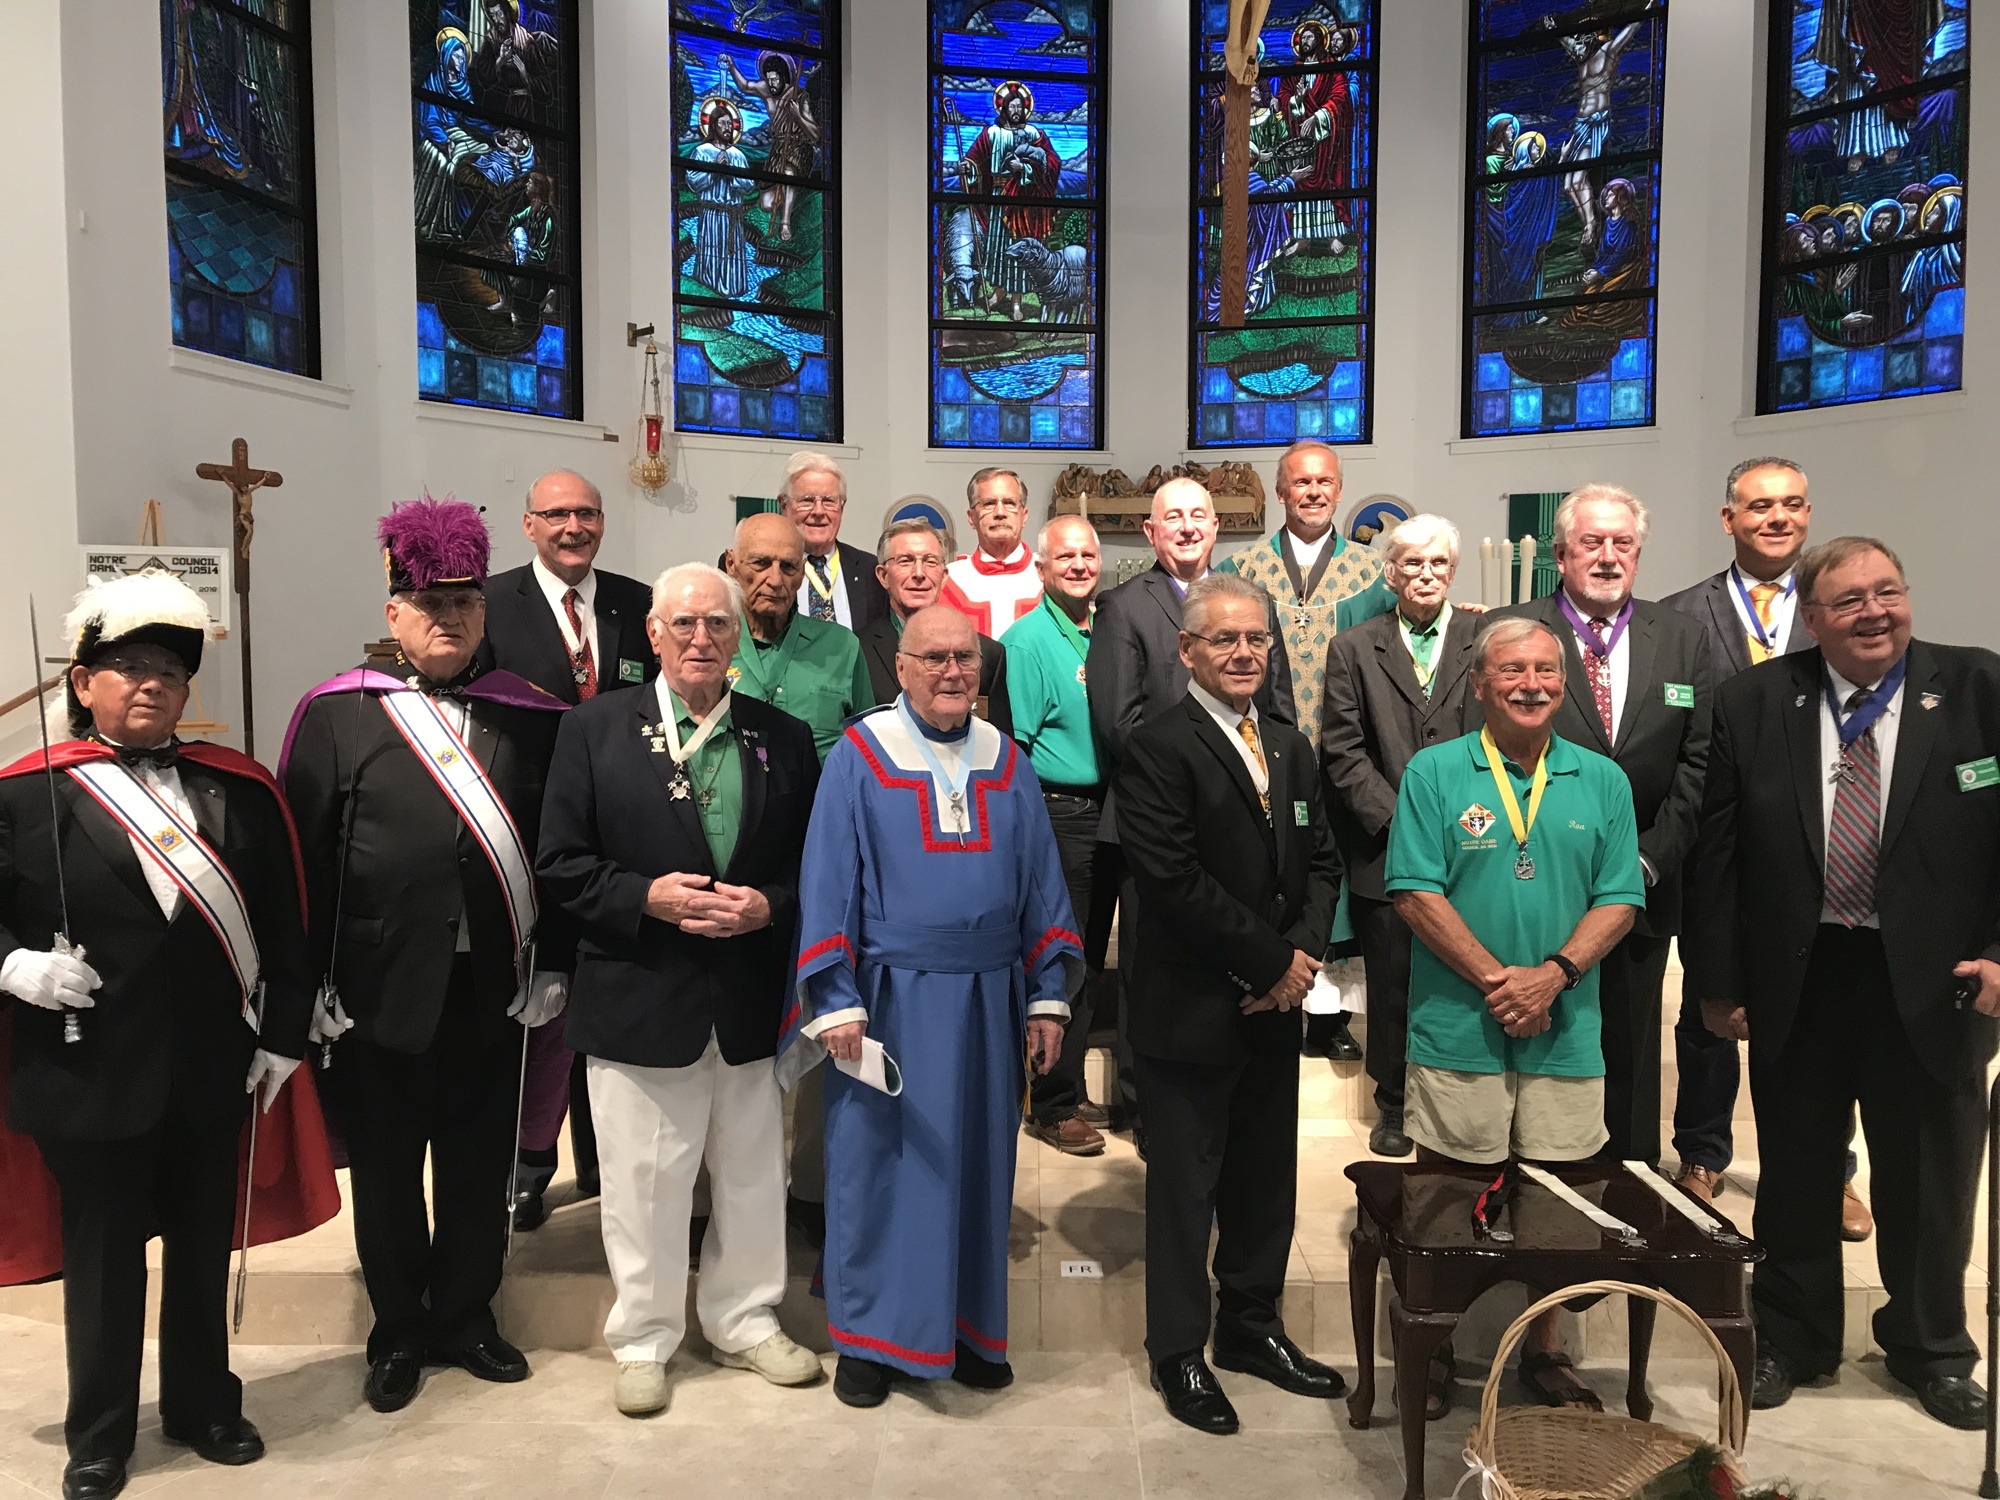 Grand Knight Patrick Mulvihill and the 2018-19 slate of officers for the Notre Dame Council 10514 were installed at Santa Maria del Mar Church. Photo courtesy of Notre Dame Council 10514